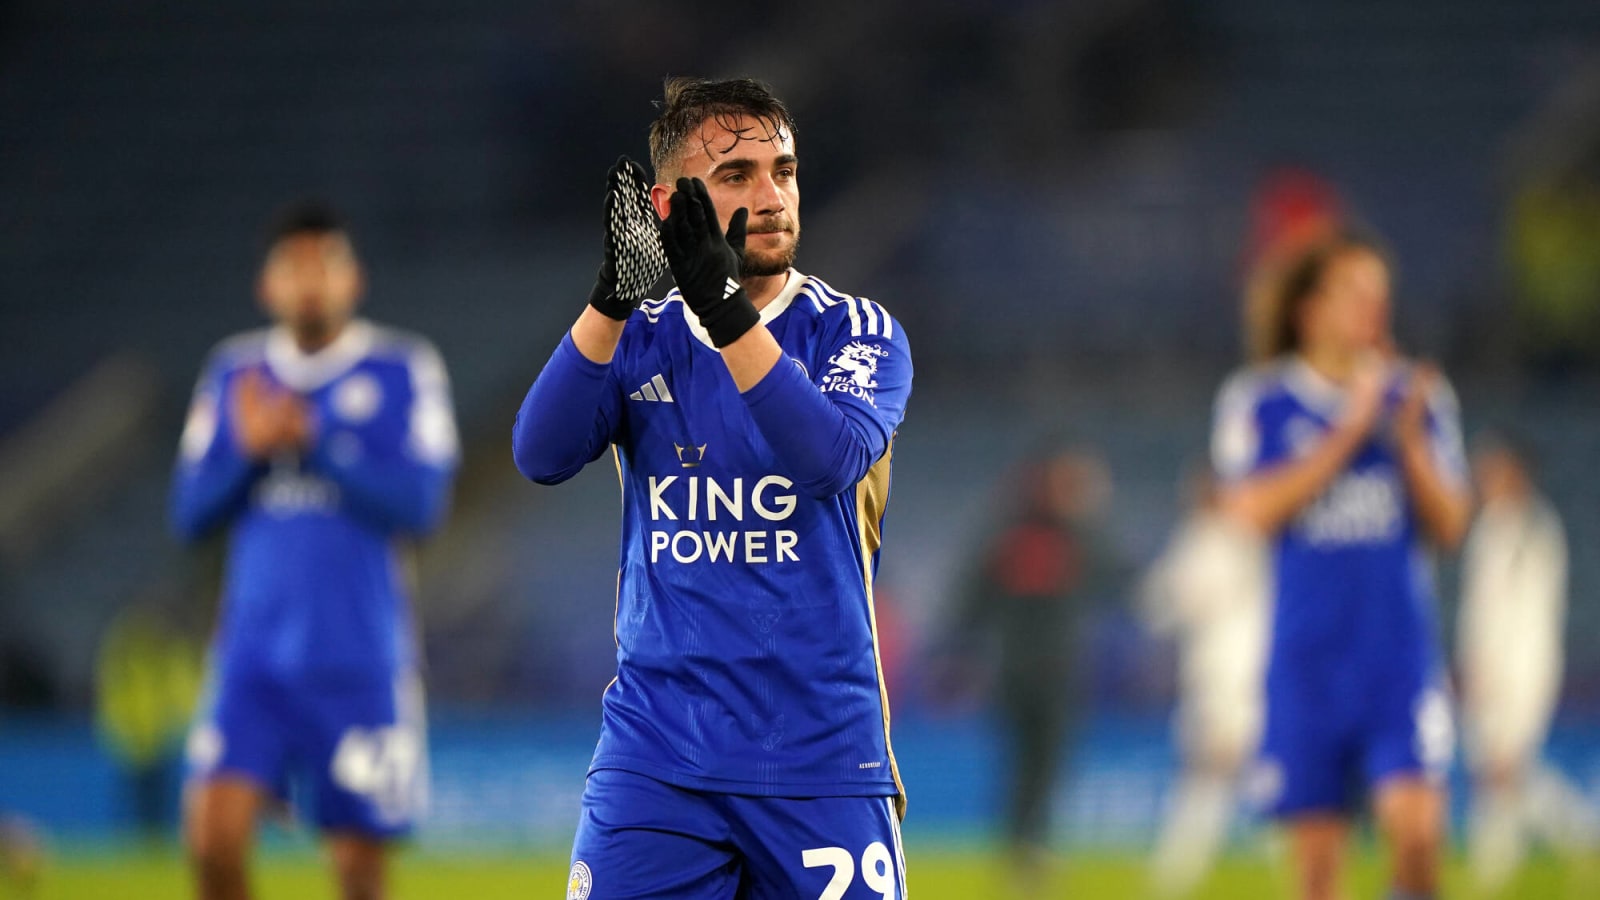 Leicester ace faces uncertain future as lack of starts jeopardises obligation to buy clause